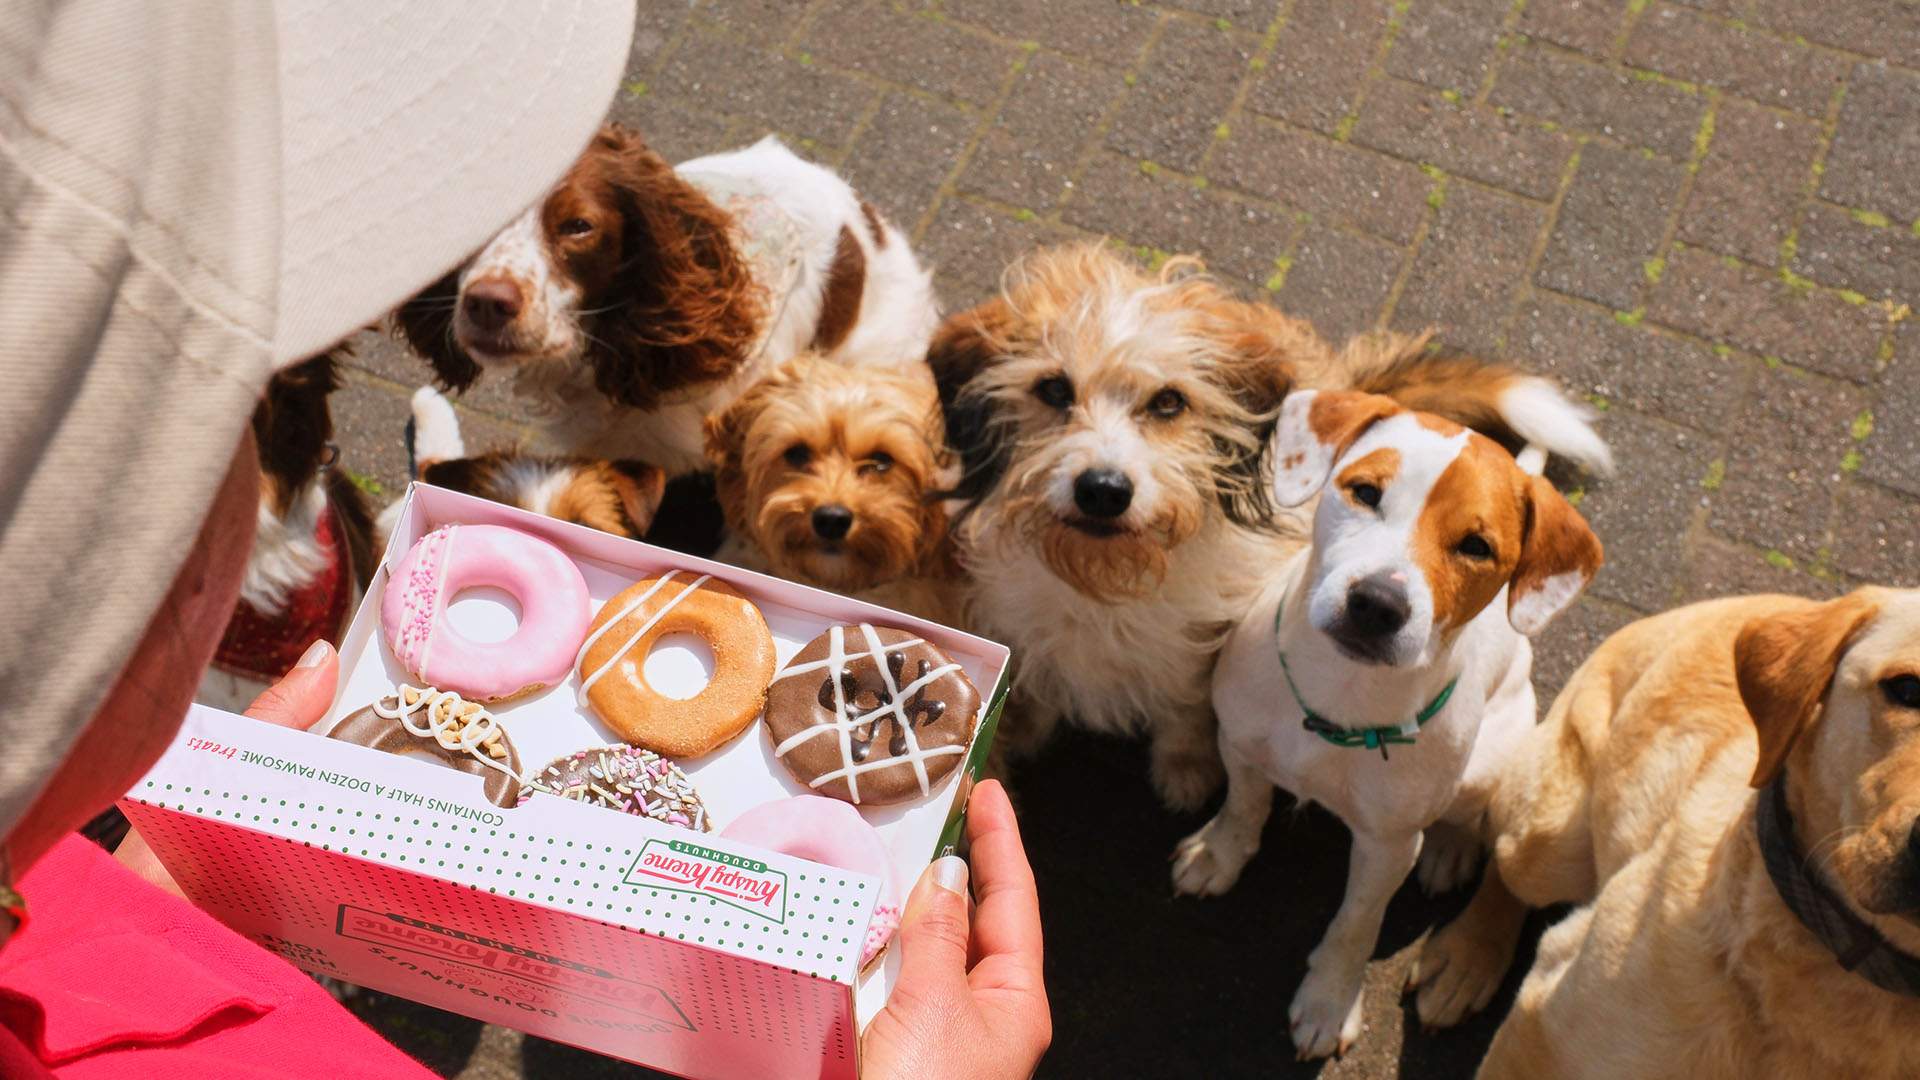 Krispy Kreme Has Brought Back Its Doughnut-Inspired Dog Biscuits for Very Good Boys and Girls